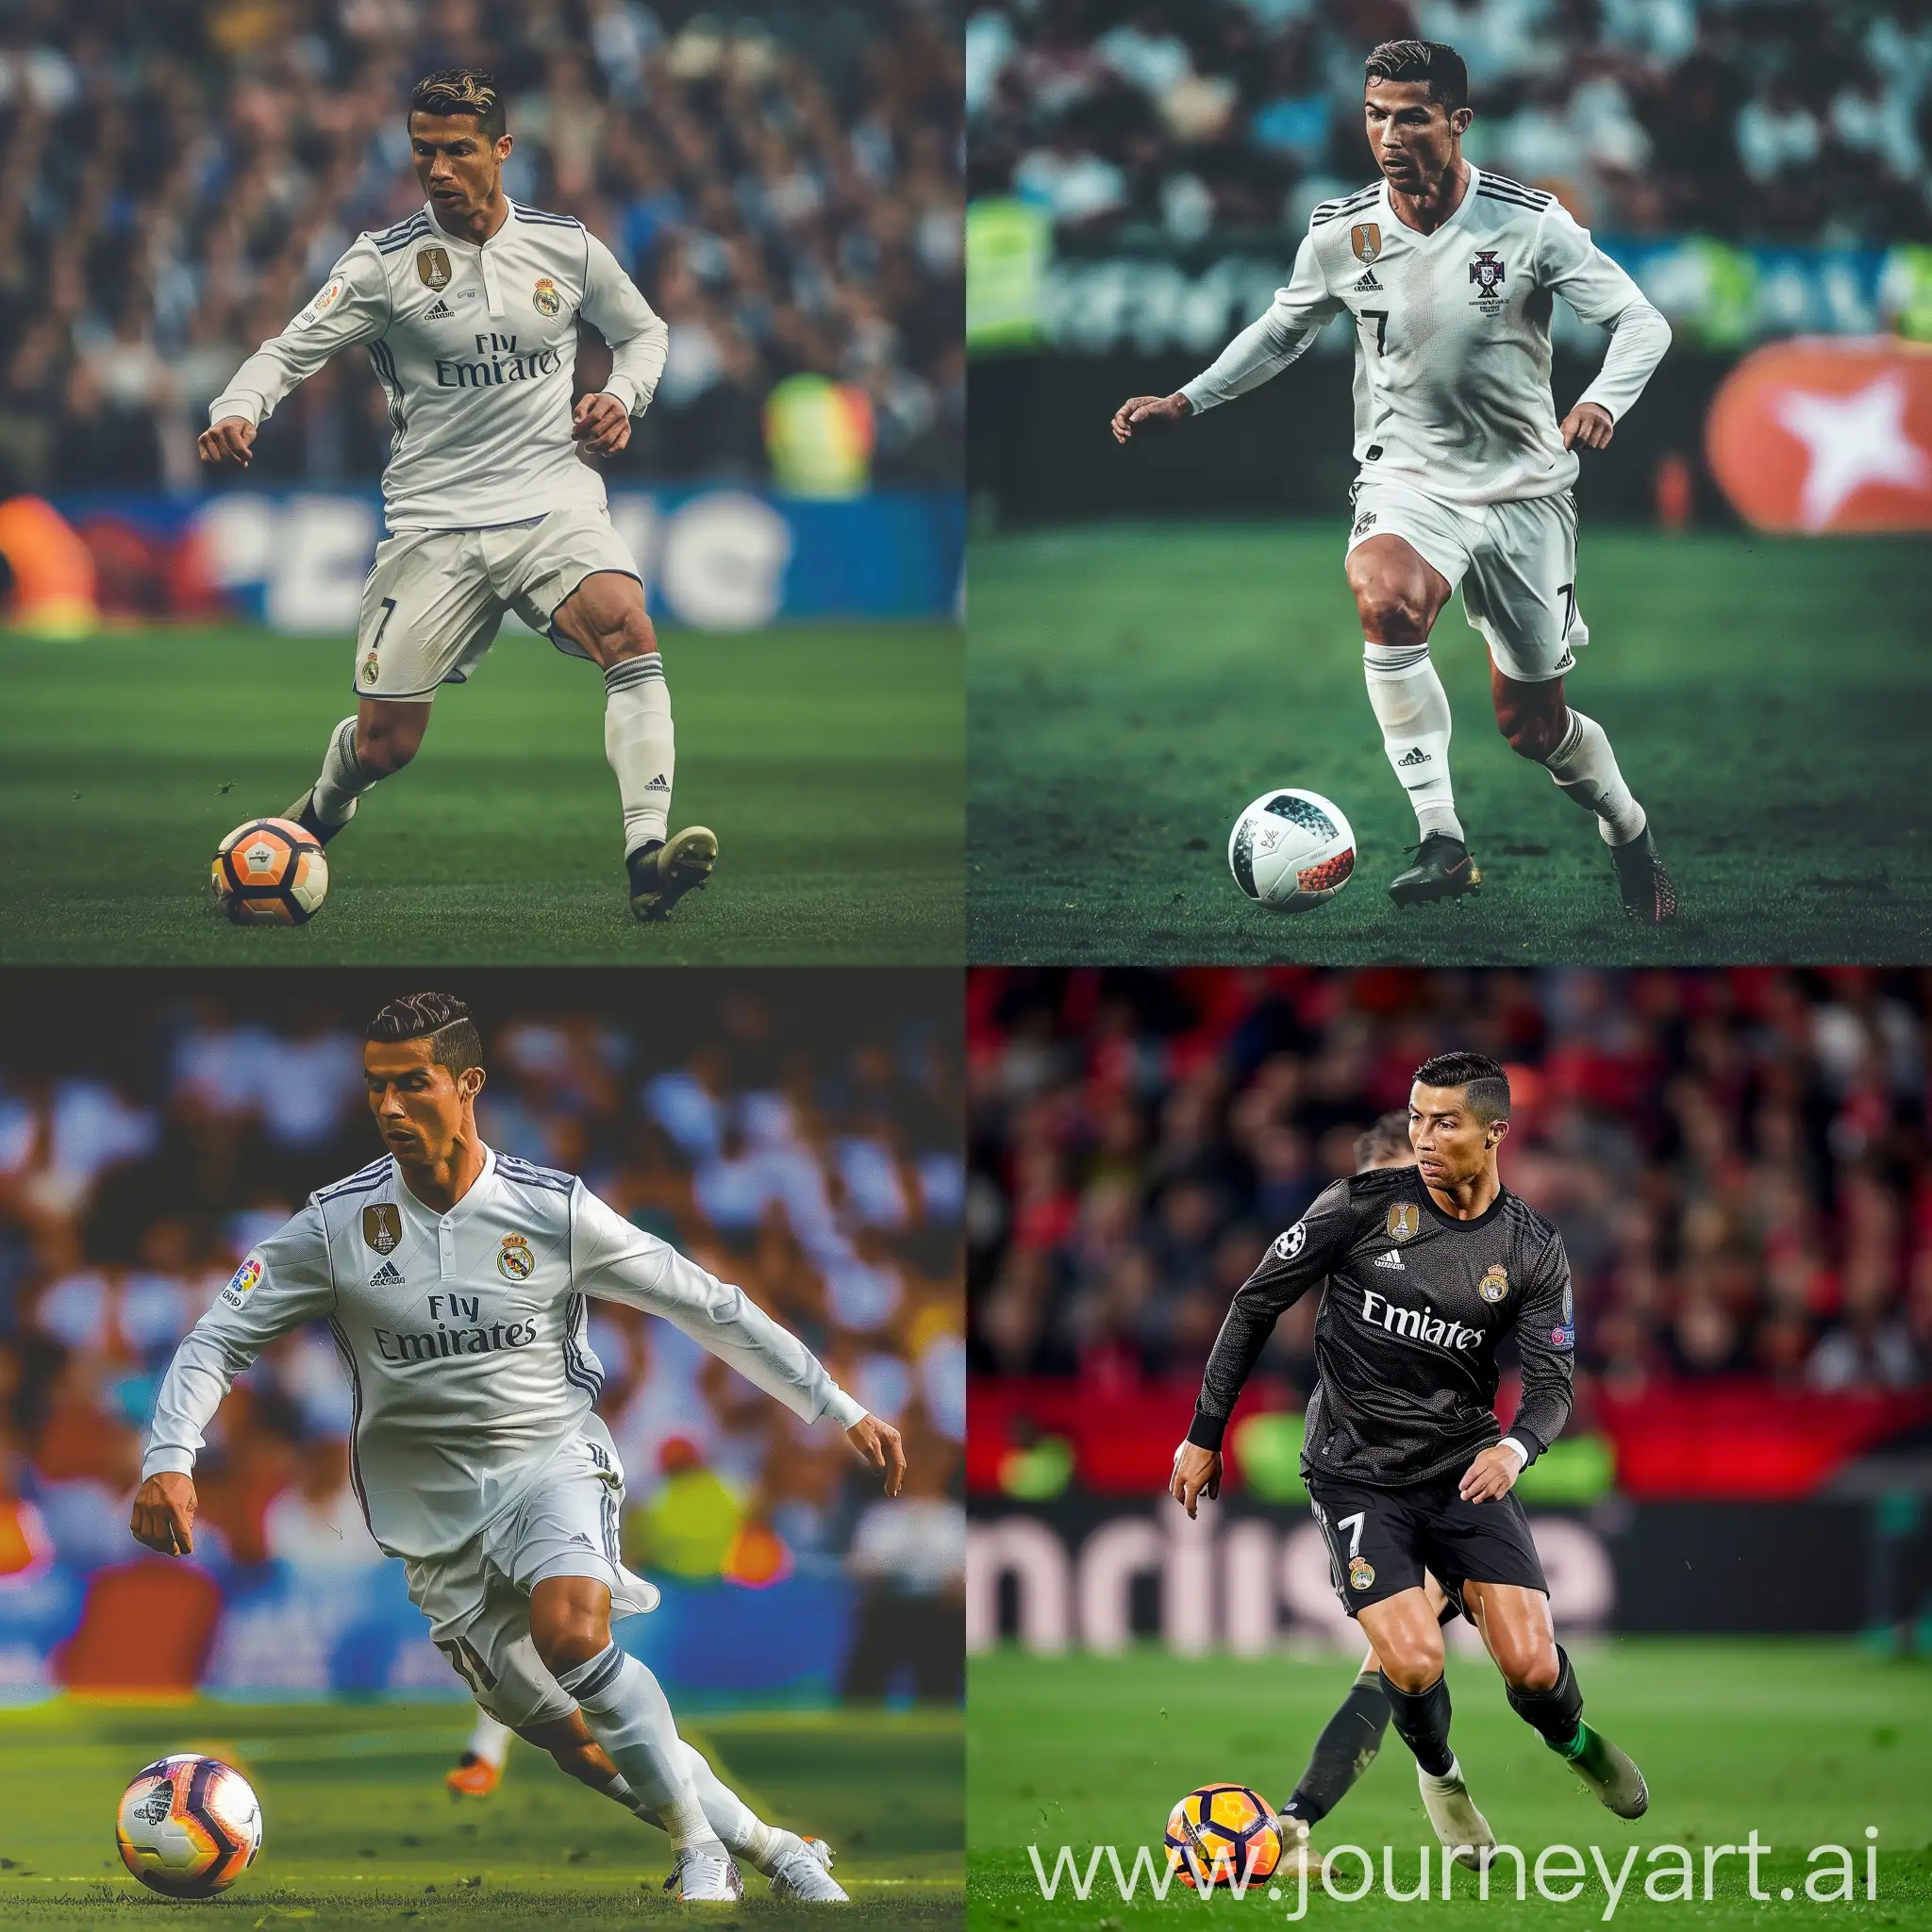 Cristiano-Ronaldo-Playing-Soccer-with-Intensity-and-Focus